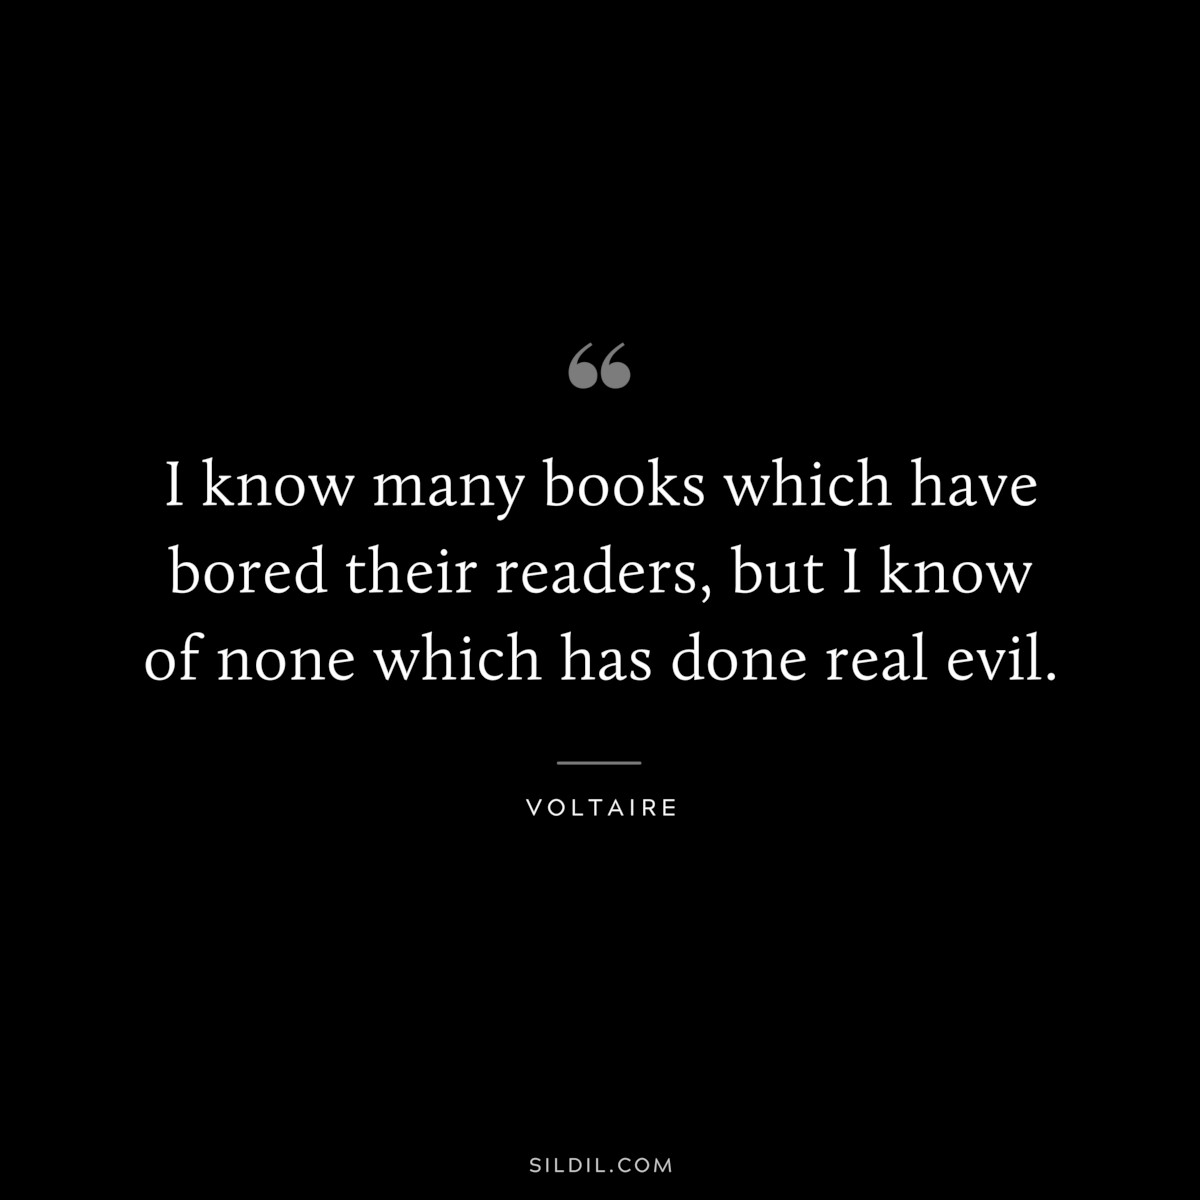 I know many books which have bored their readers, but I know of none which has done real evil. ― Voltaire